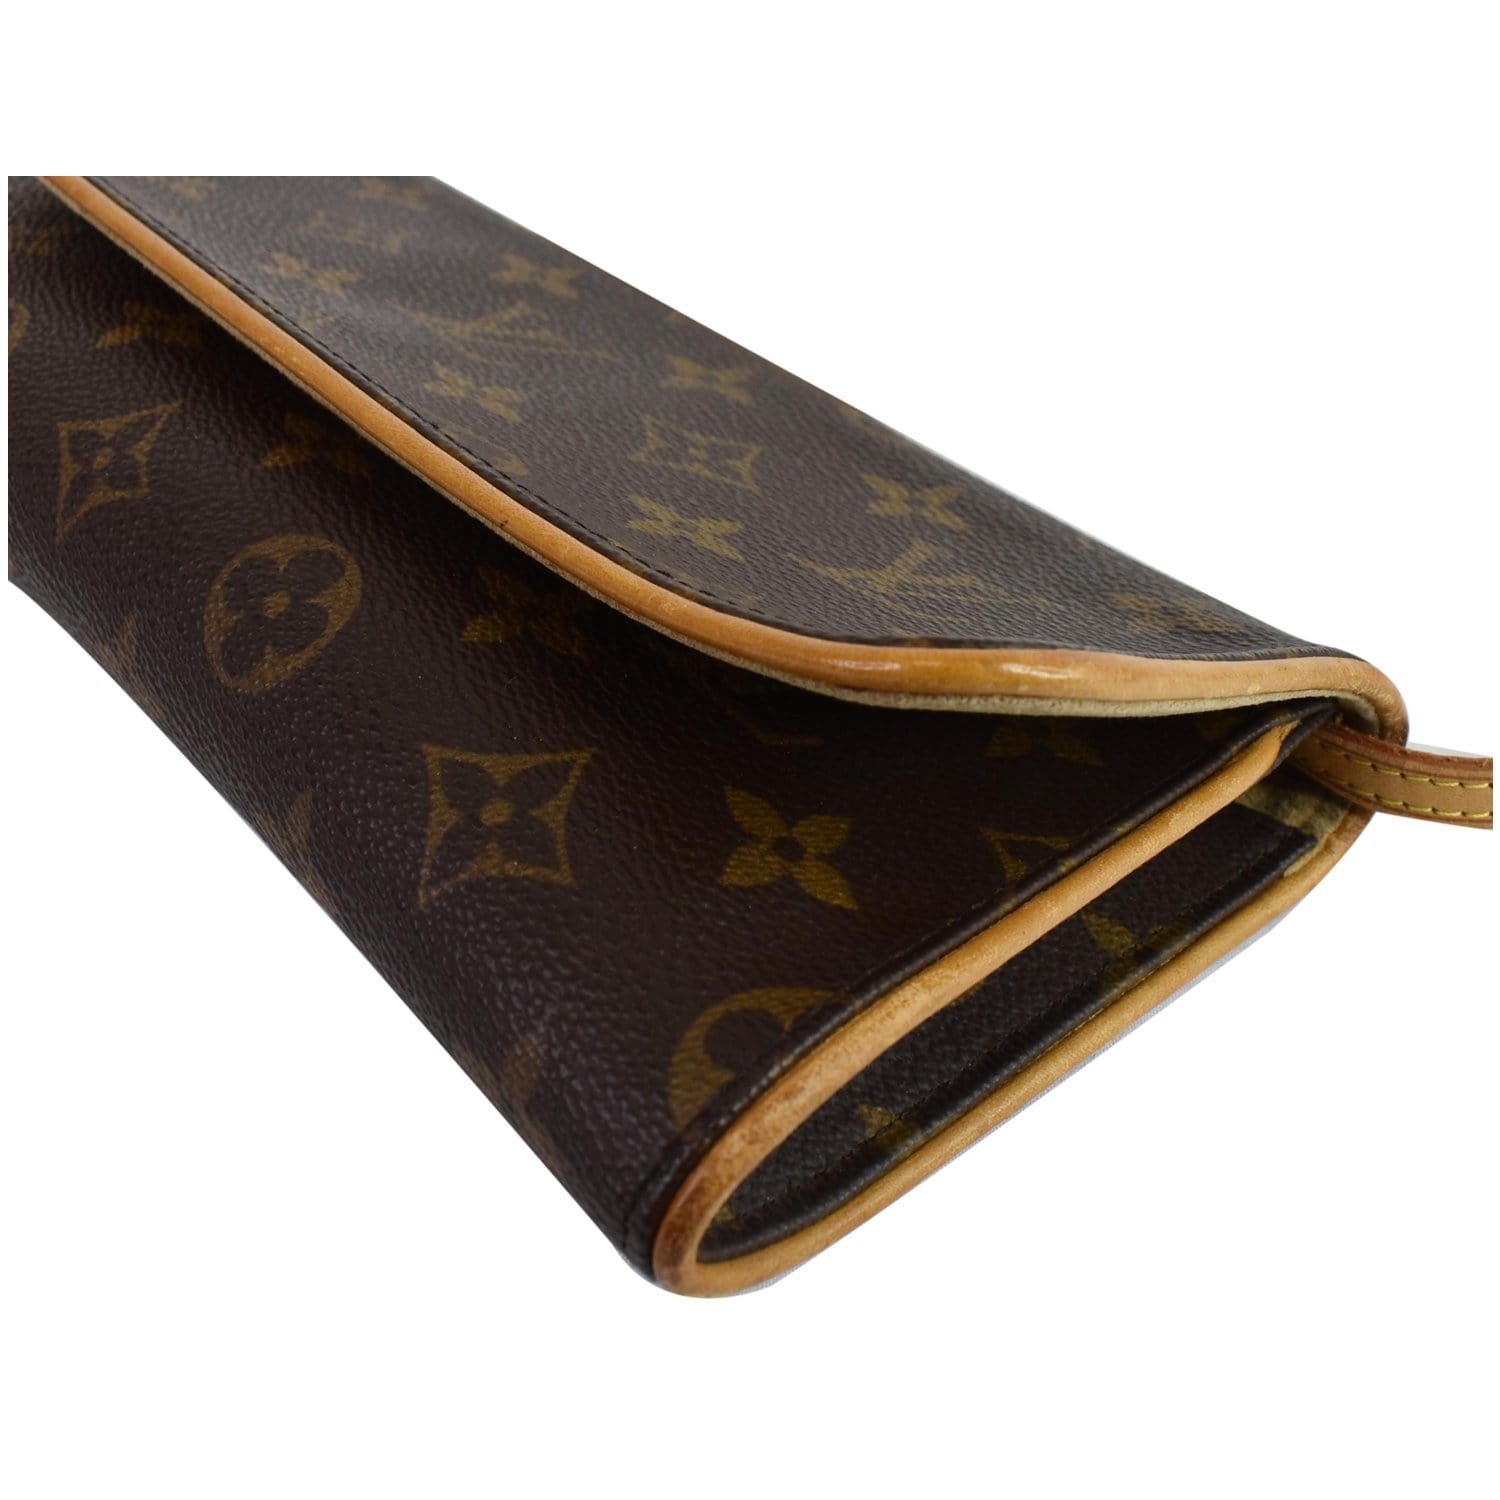 Louis Vuitton Pochette Twin Gm Canvas Clutch Bag (pre-owned) in